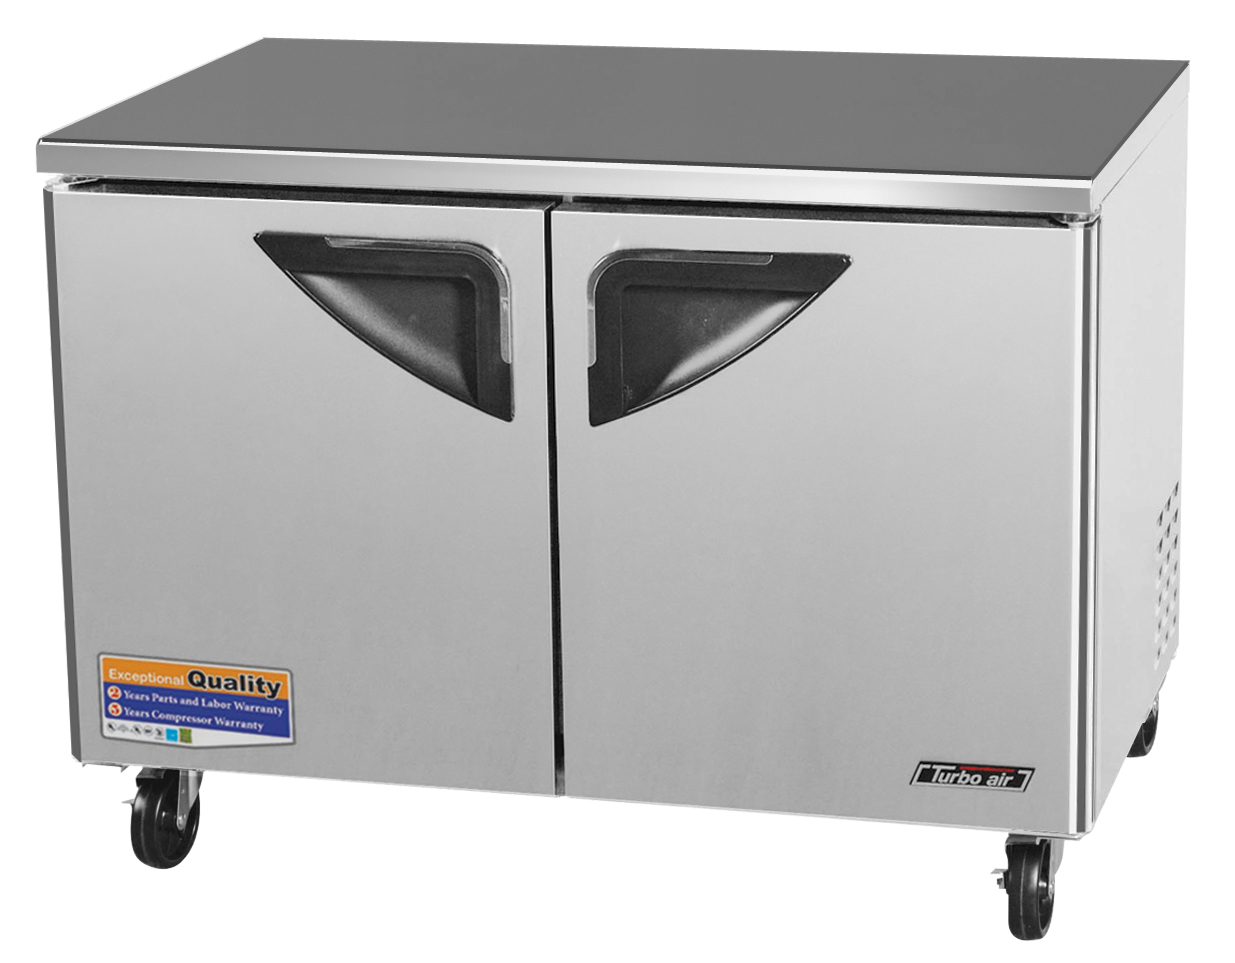 Super Deluxe Series Undercounter Freezer, two-section